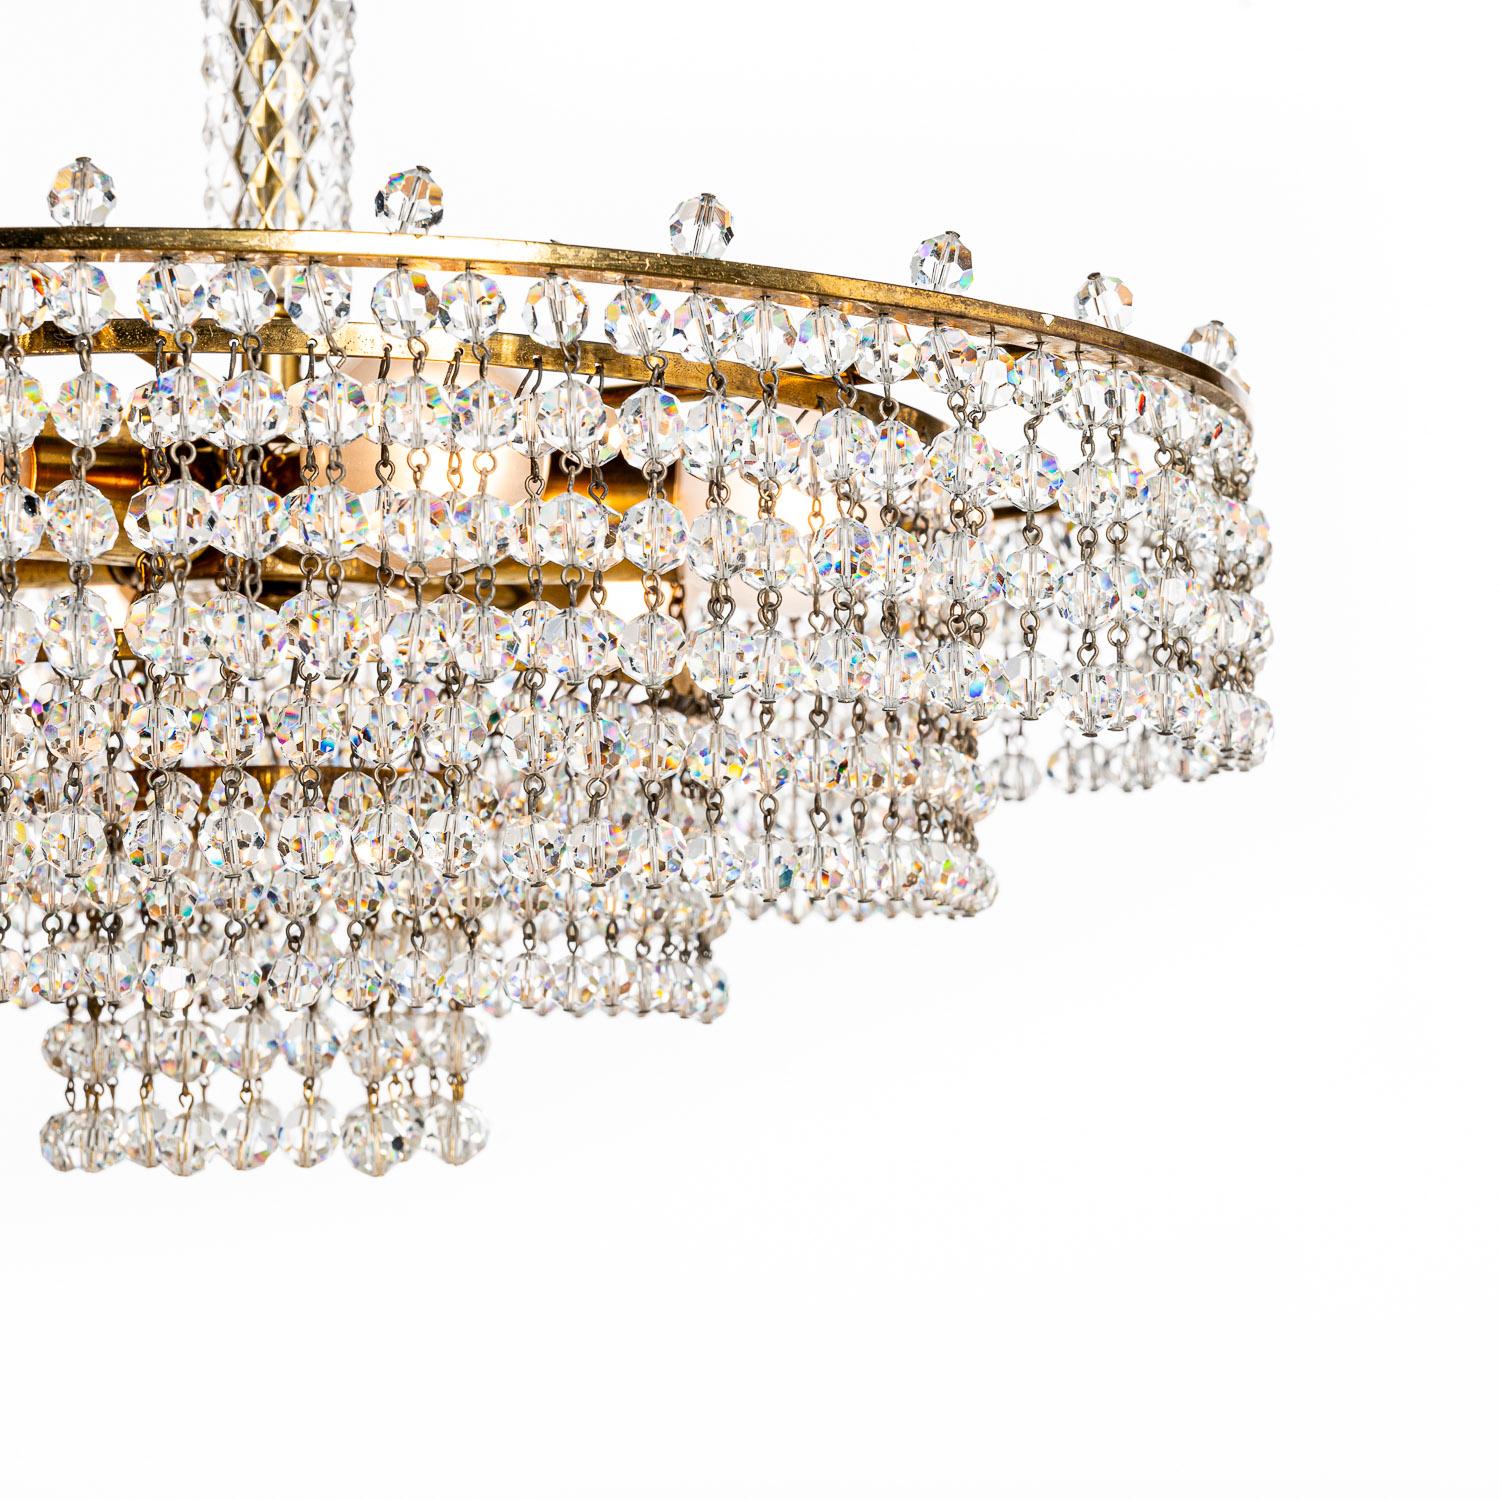 This is a wonderful design attributed attributed to Lobmeyr. Stunning crystal glass and patinated brass chandelier. The combination of these materials expertly crafted give this piece a real ritzy feel. Made in the 1950s, it’s still in beautiful